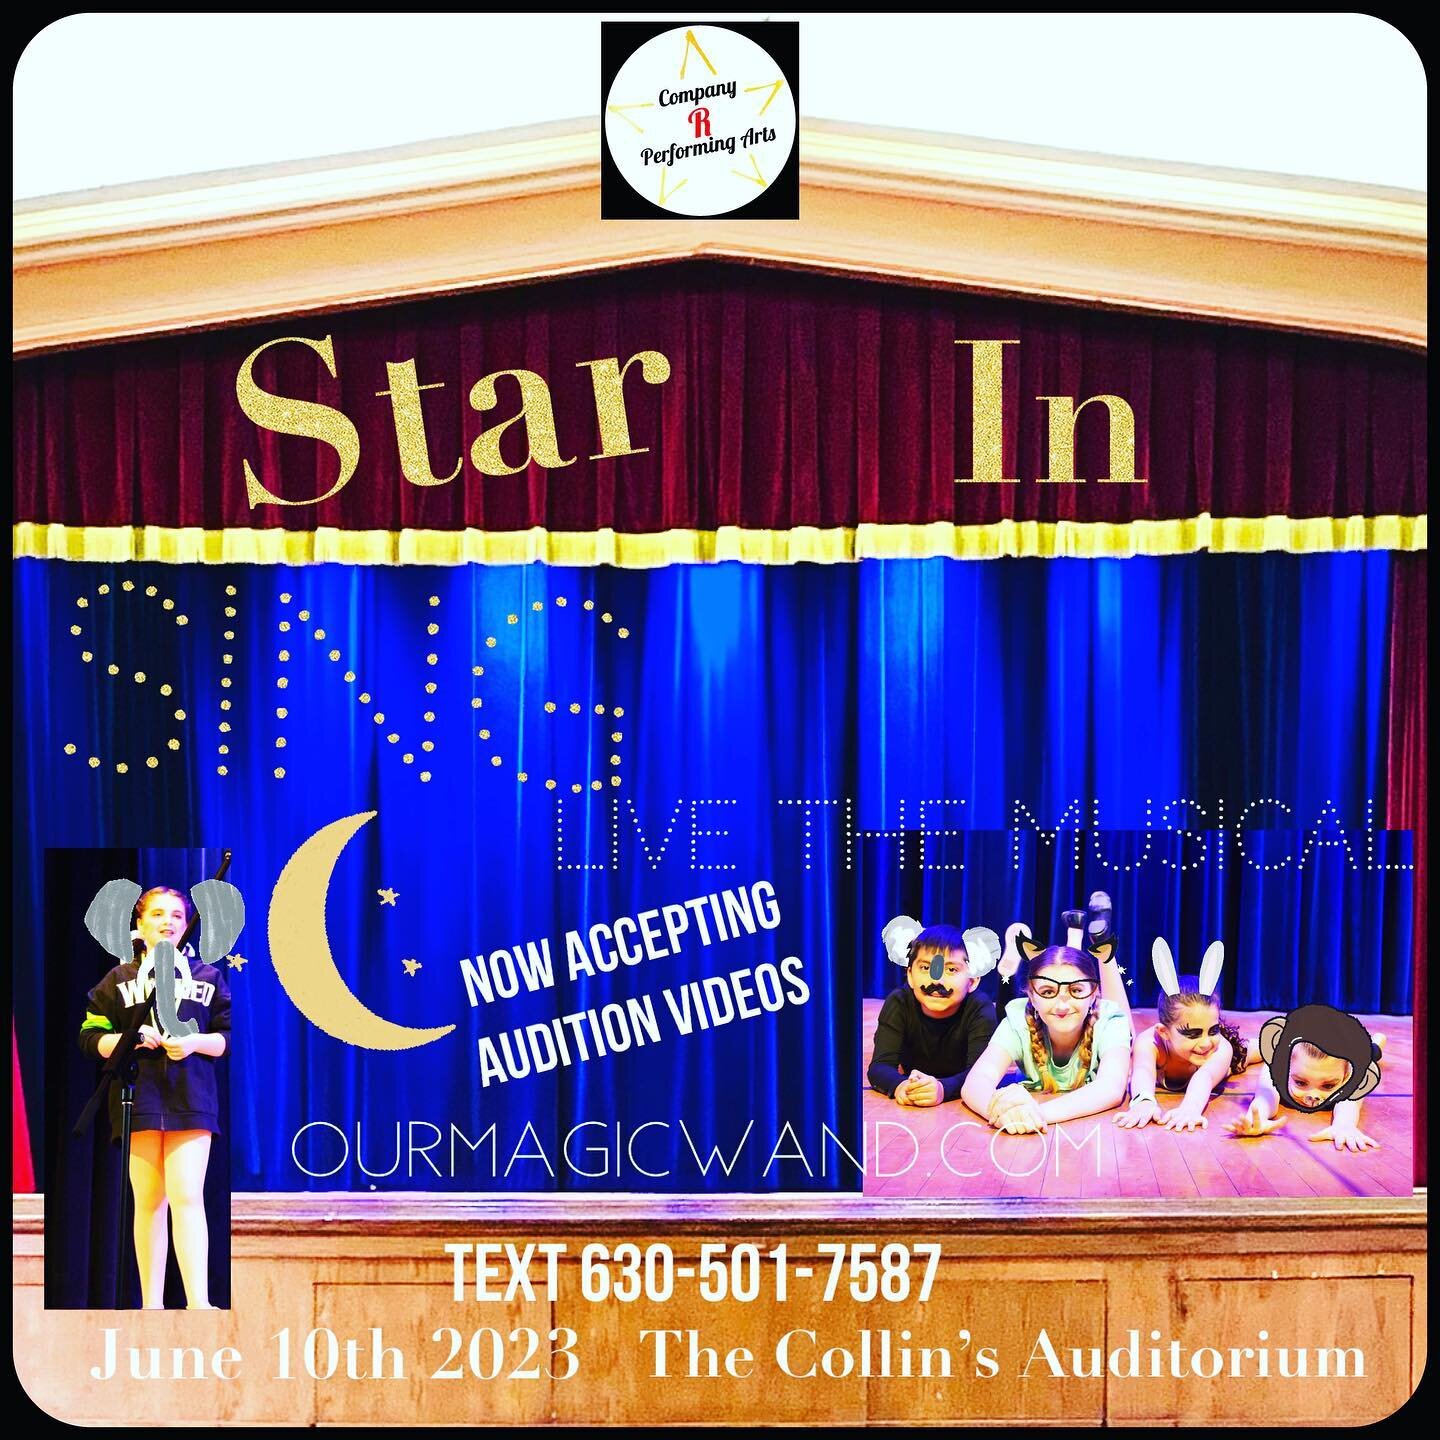 Star in SING Live the Musical! Now accepting audition videos Ages 5-17 More info at ourmagicwand.com #yourcreativejourneystartshere @companyrperformingarts @rstudioofperformingarts companyrperformingarts@gmail.com